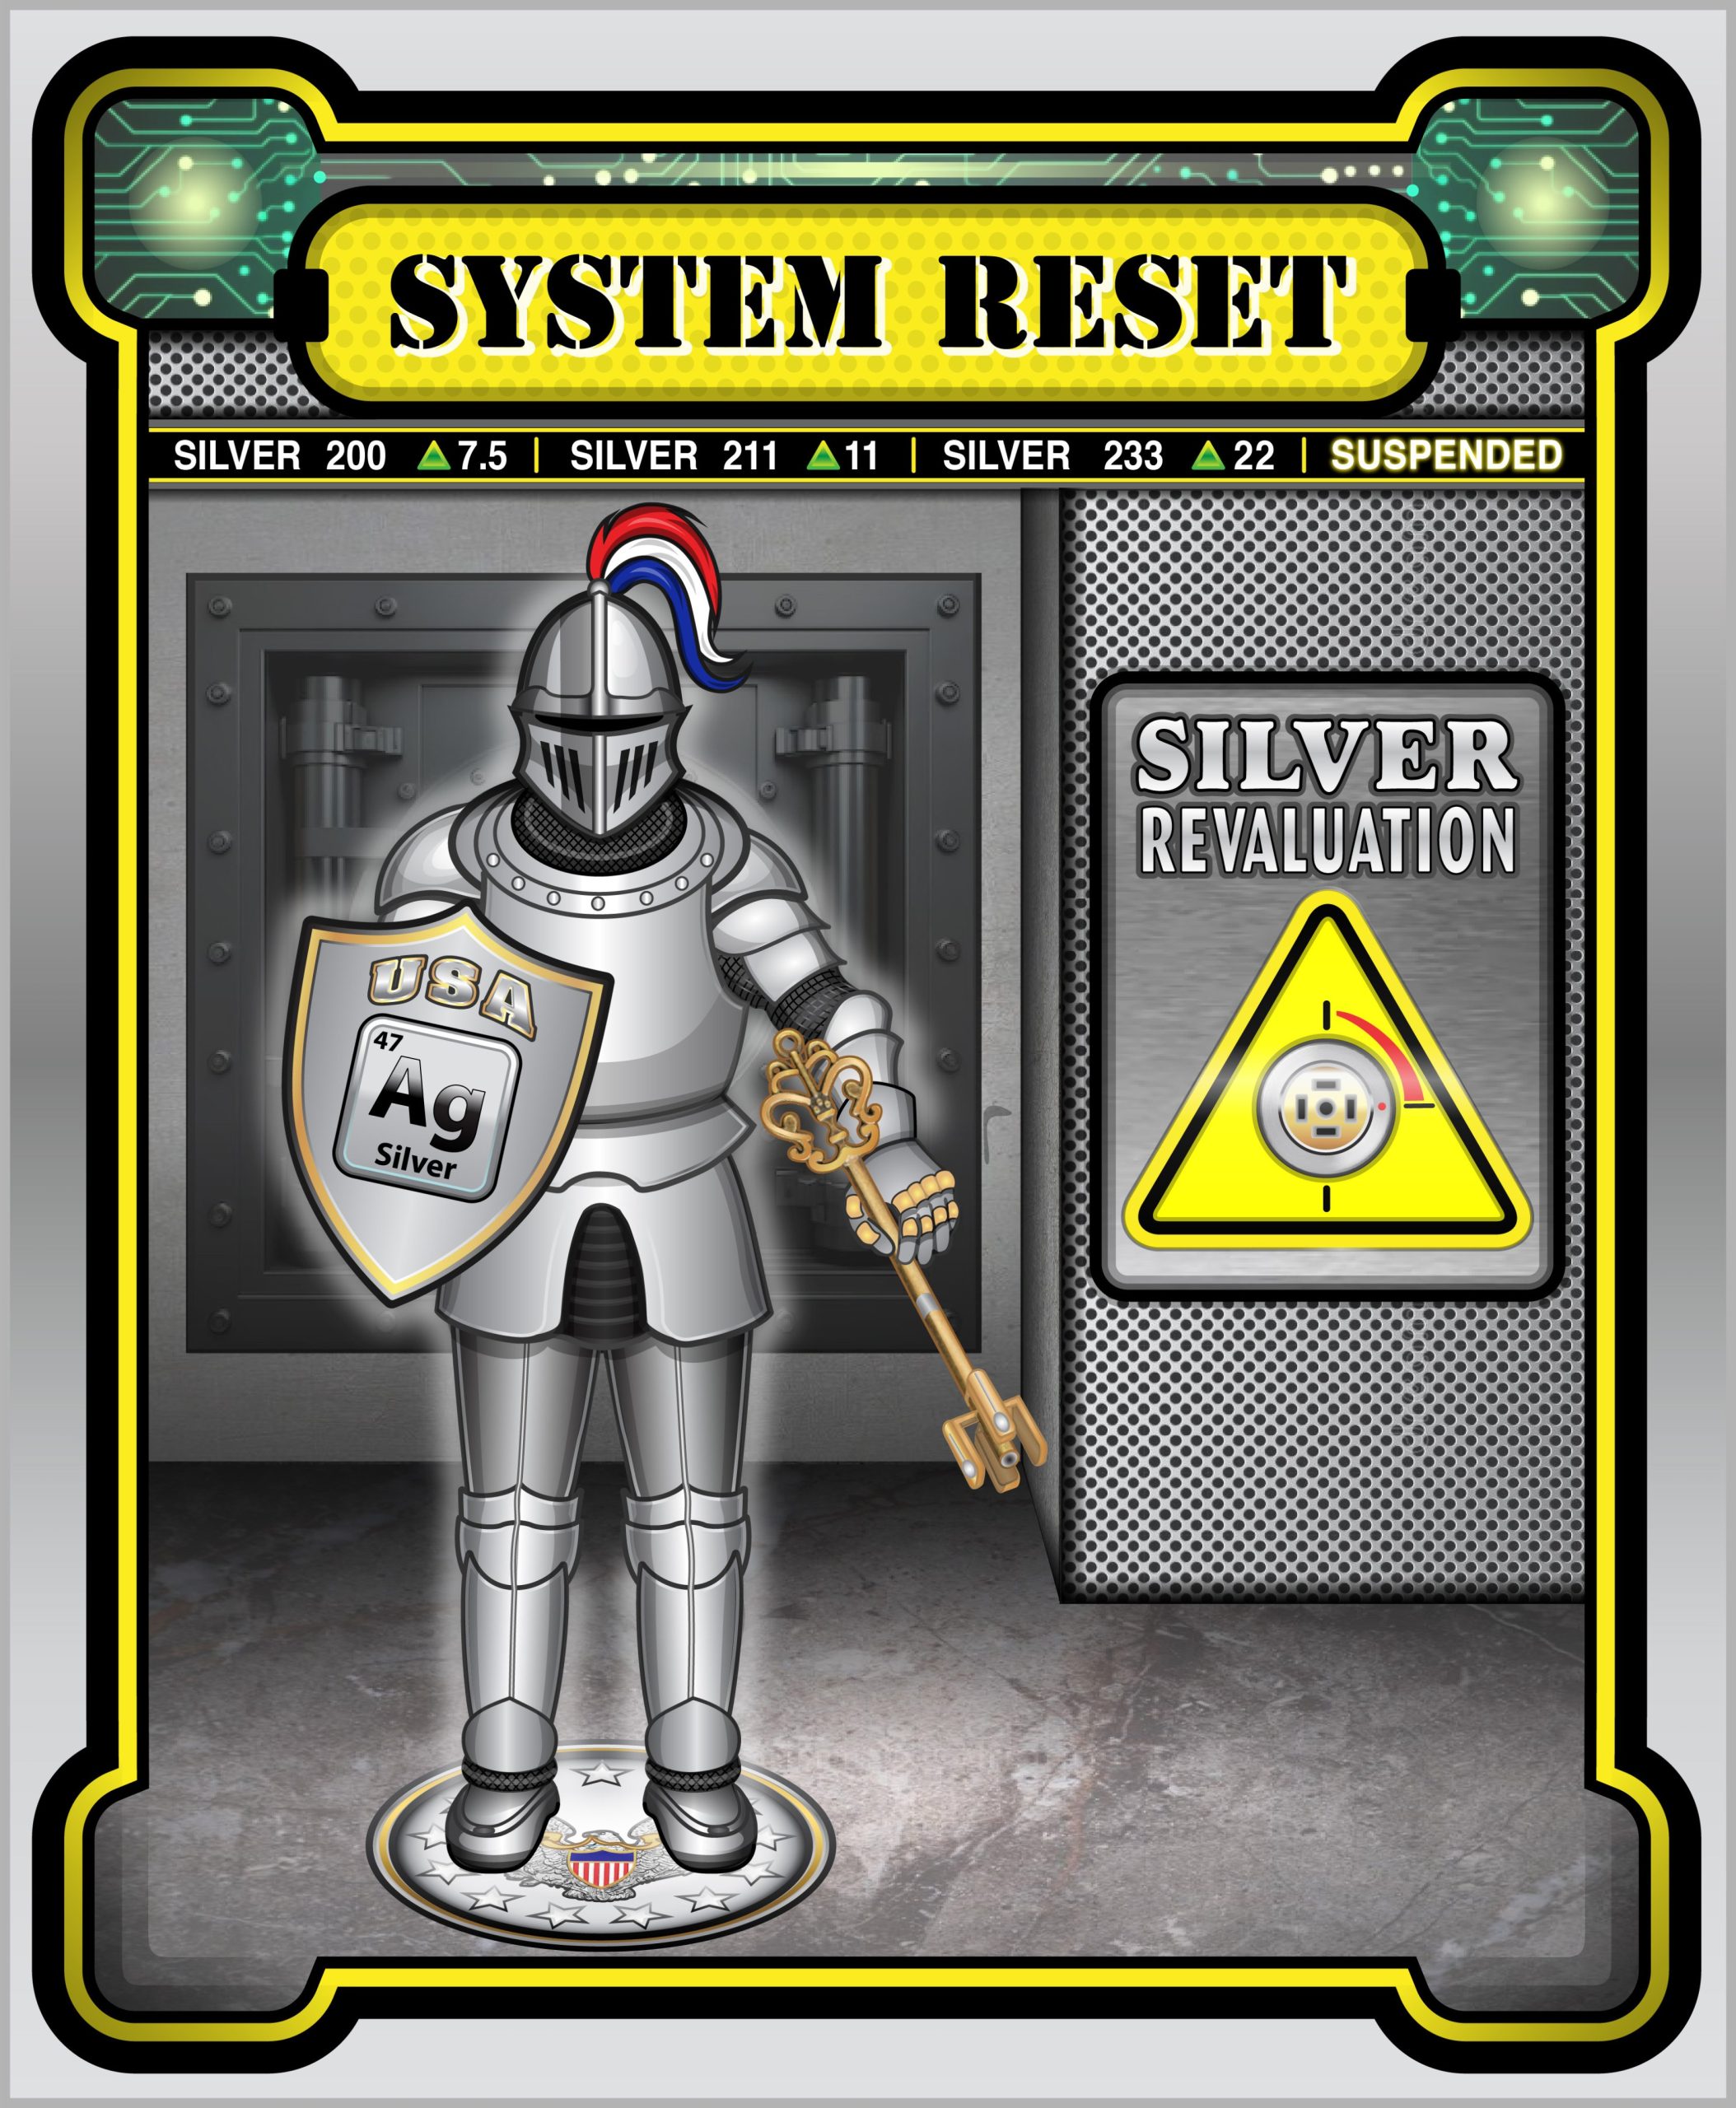 The Next Phase: Silver Revaluation and the Financial System Reset